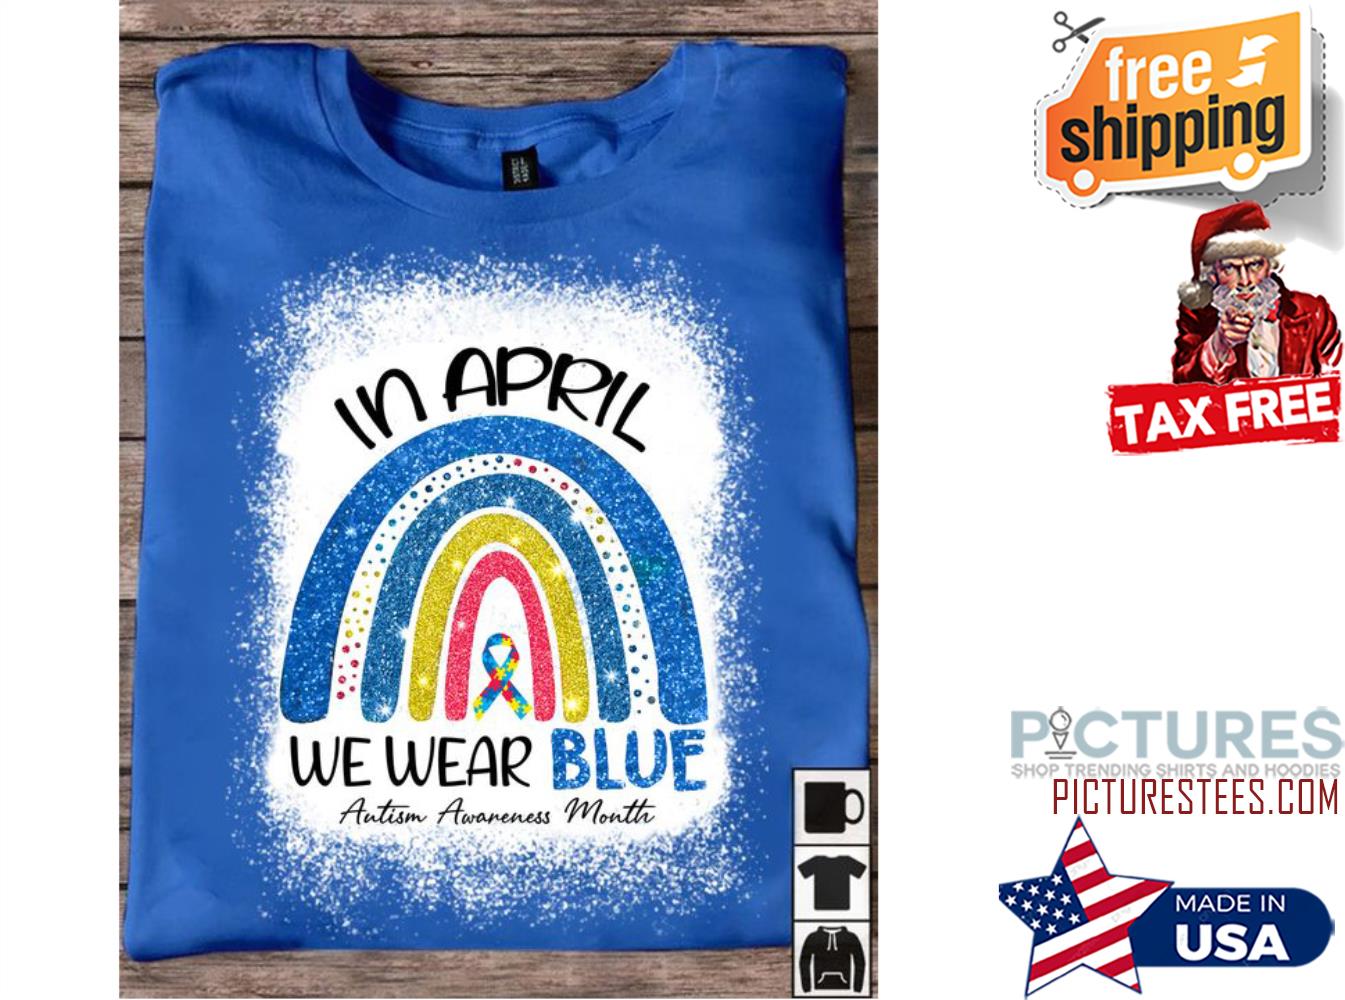 In April We Wear Blue Autism Awareness month t-shirt